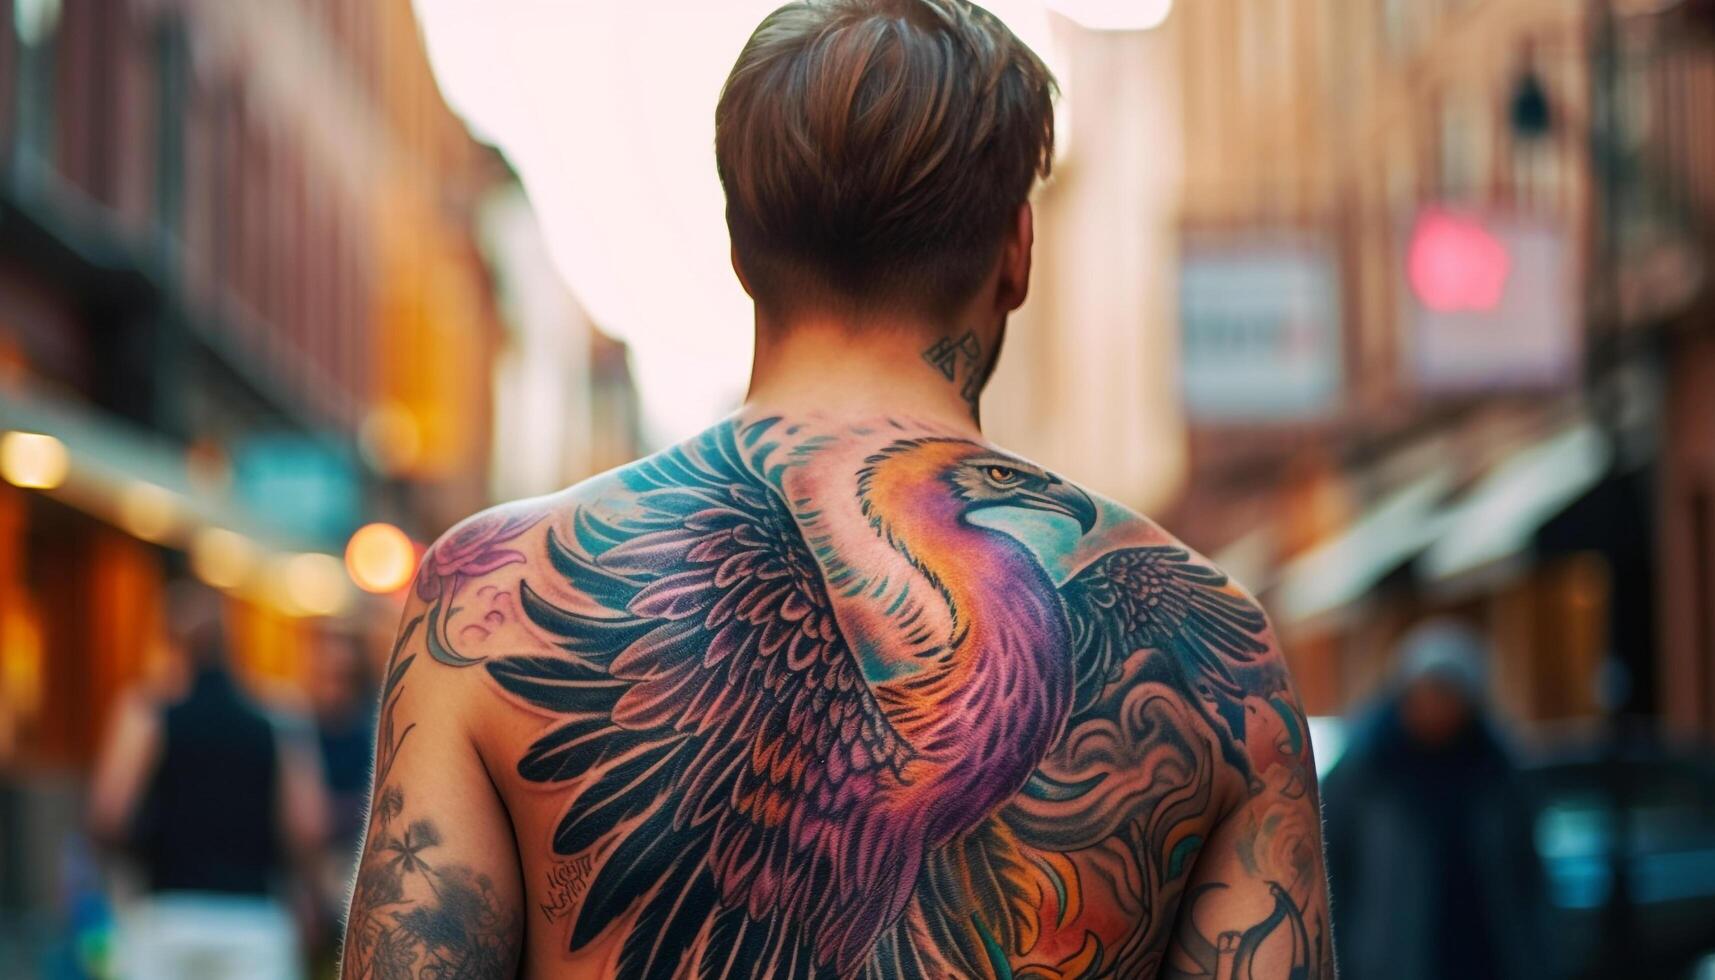 Walking men with tattoos admire city architecture generated by AI photo